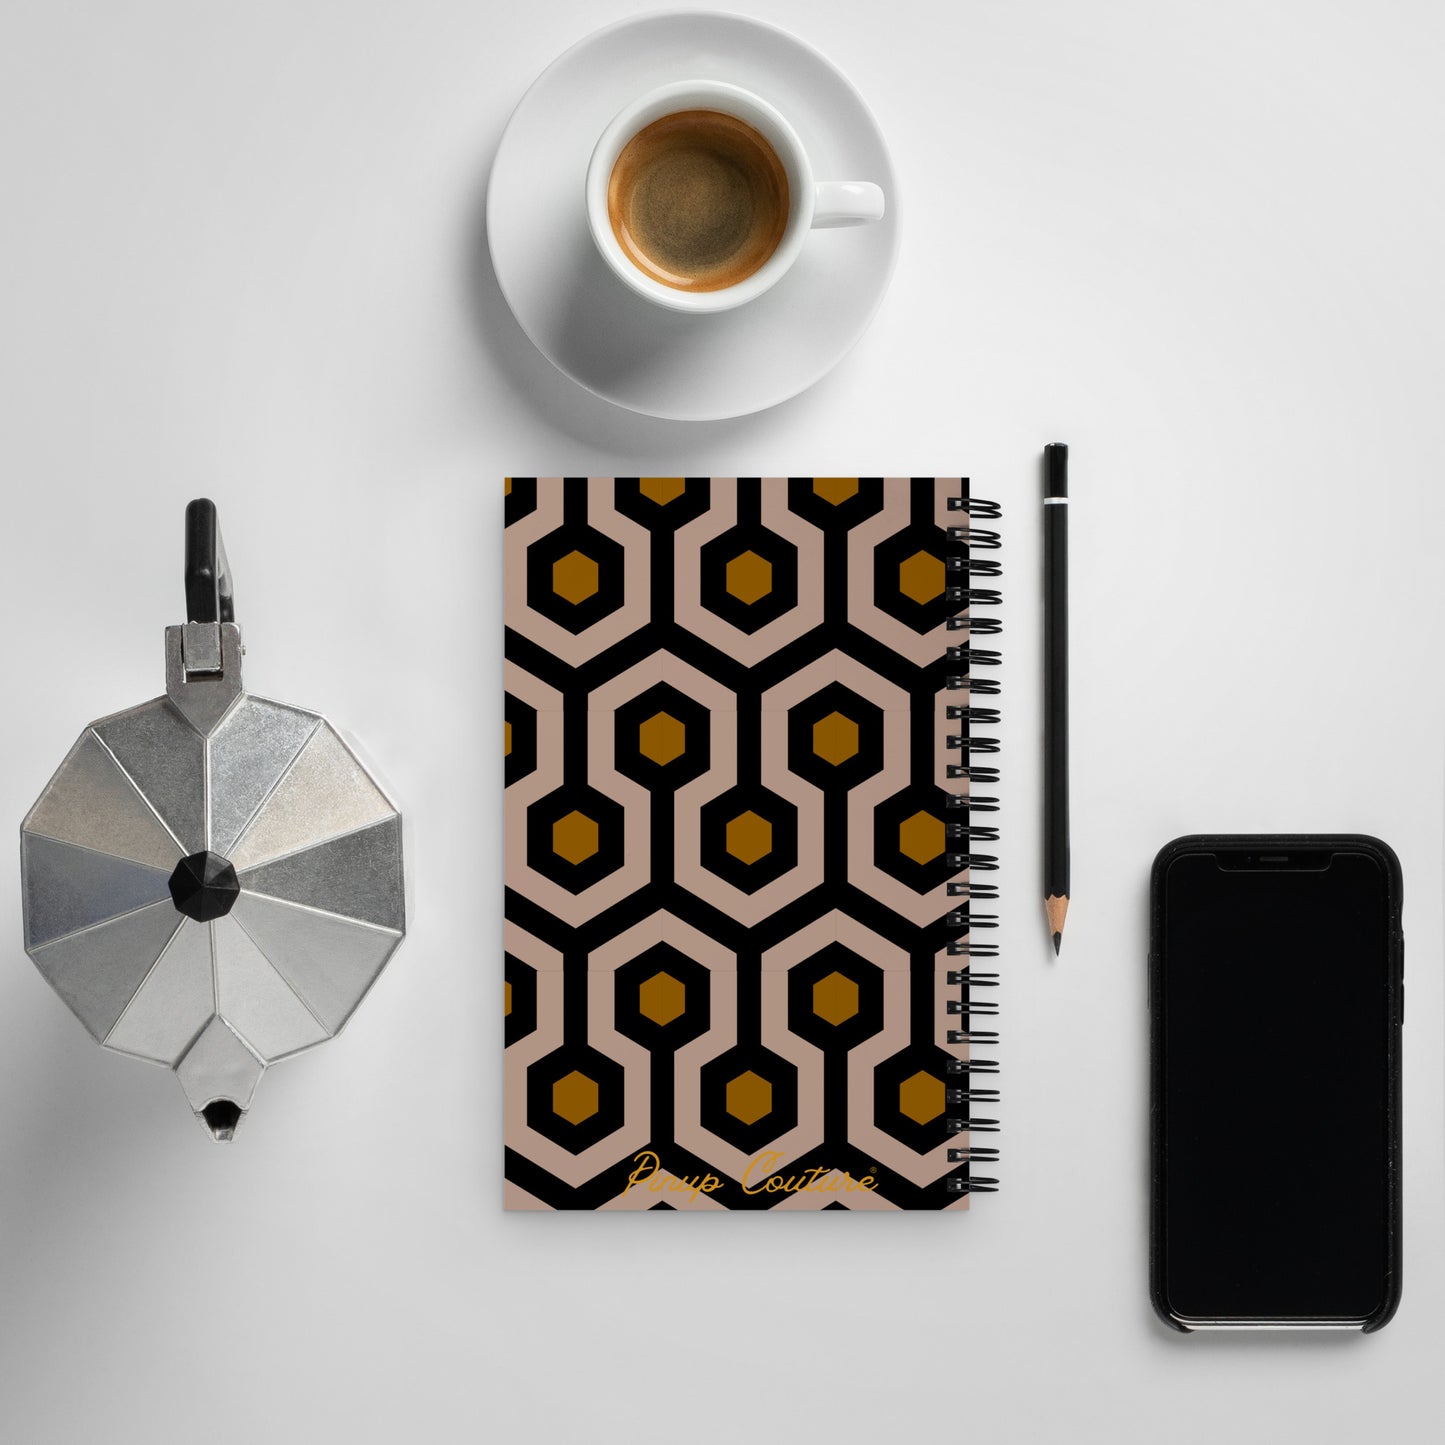 8.5"x5.5" Spiral notebook with dotted pages in Brown Hexagon Design | Pinup Couture Home